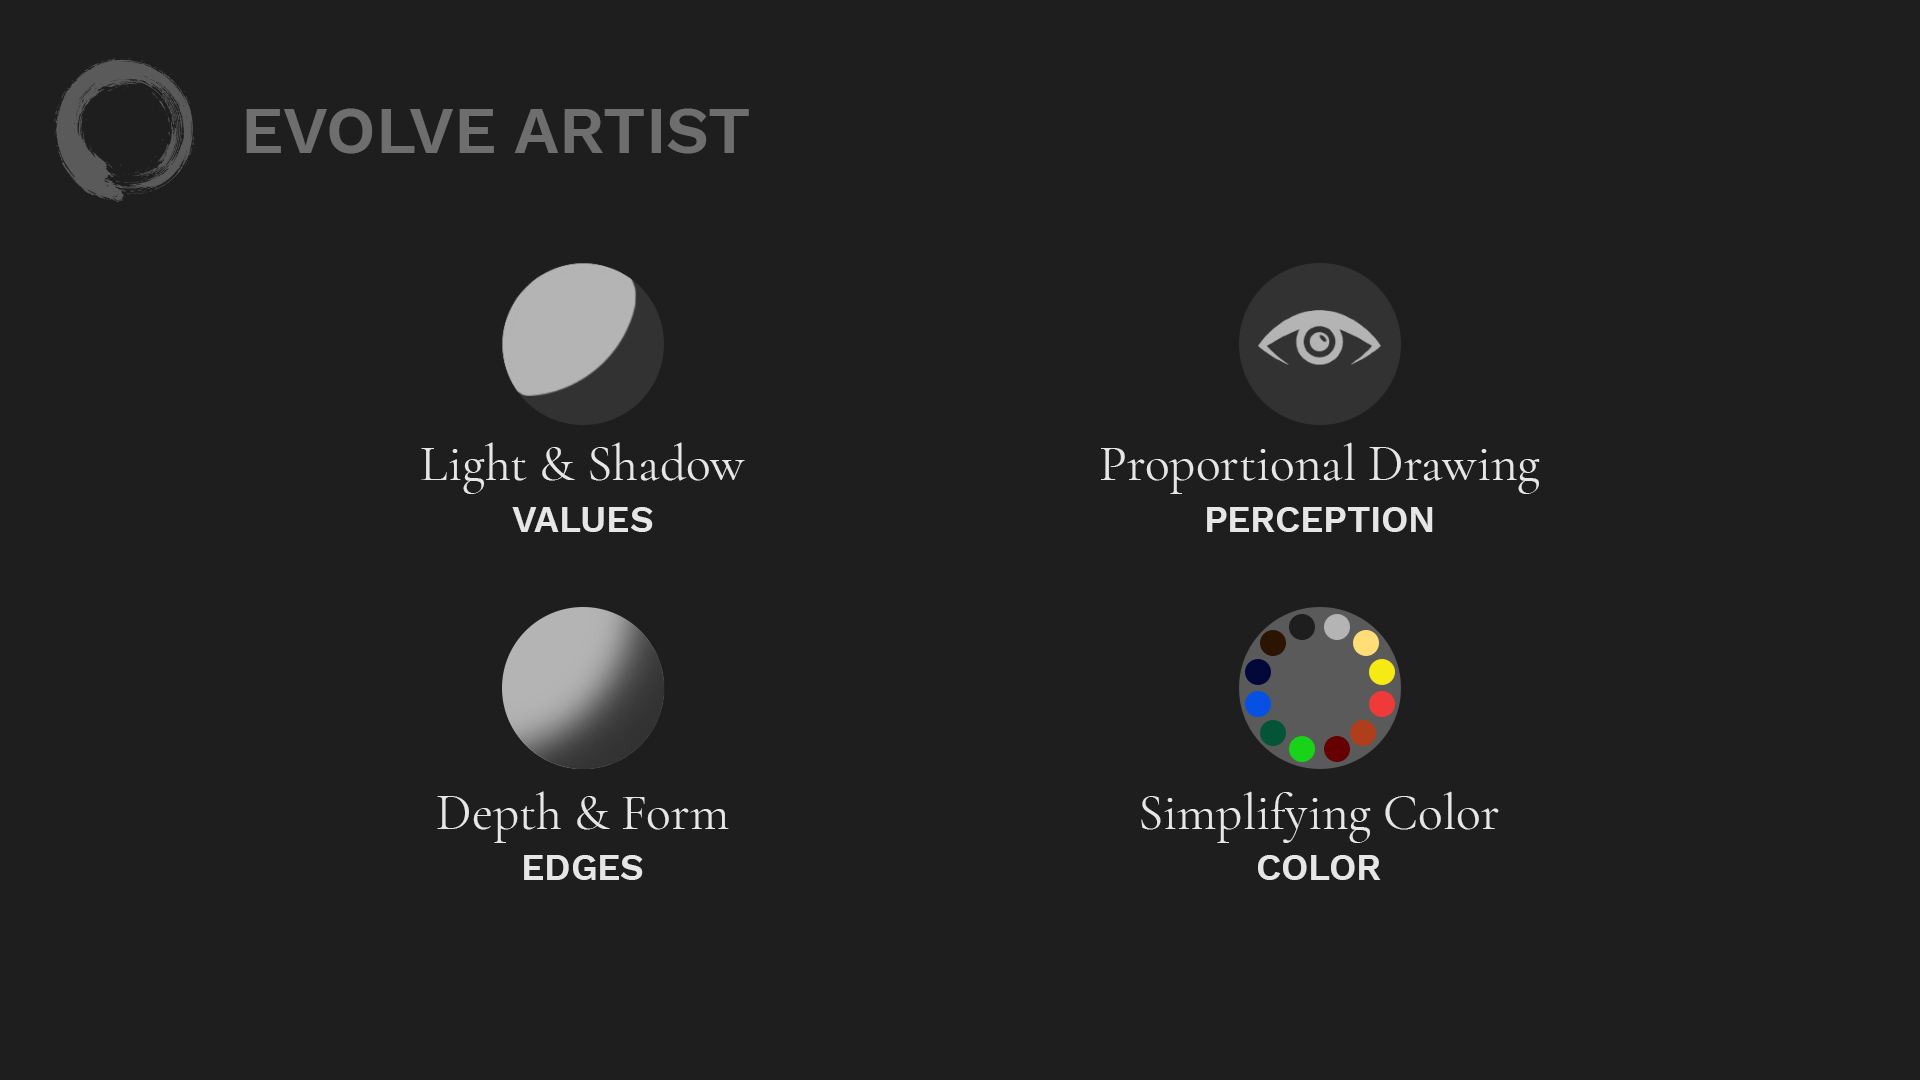 The fundamentals of art are values, edges, perception, and color.